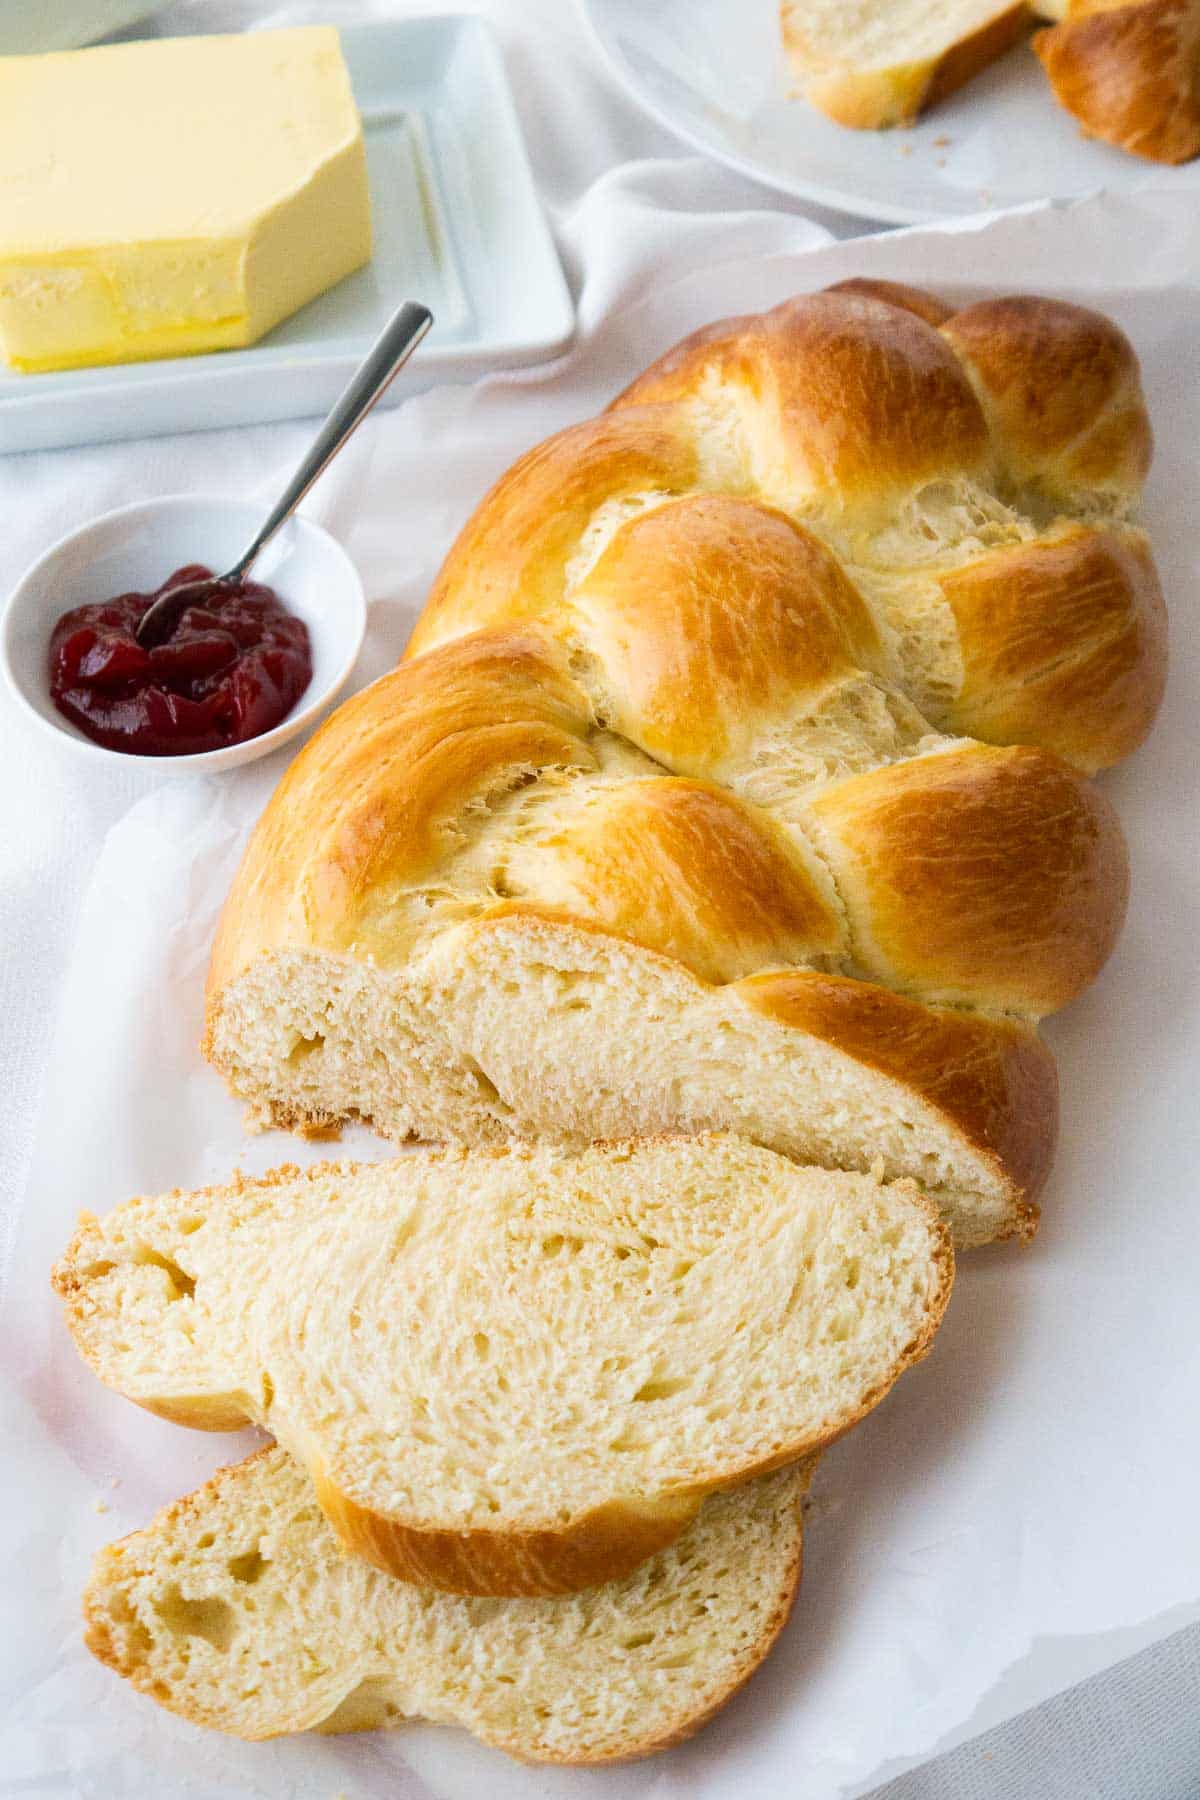 A loaf of German Sweet Bread, with a slice cut off and lying in front of it on a white dish towel next to a small white bowl of strawberry jam with a spoon in it.